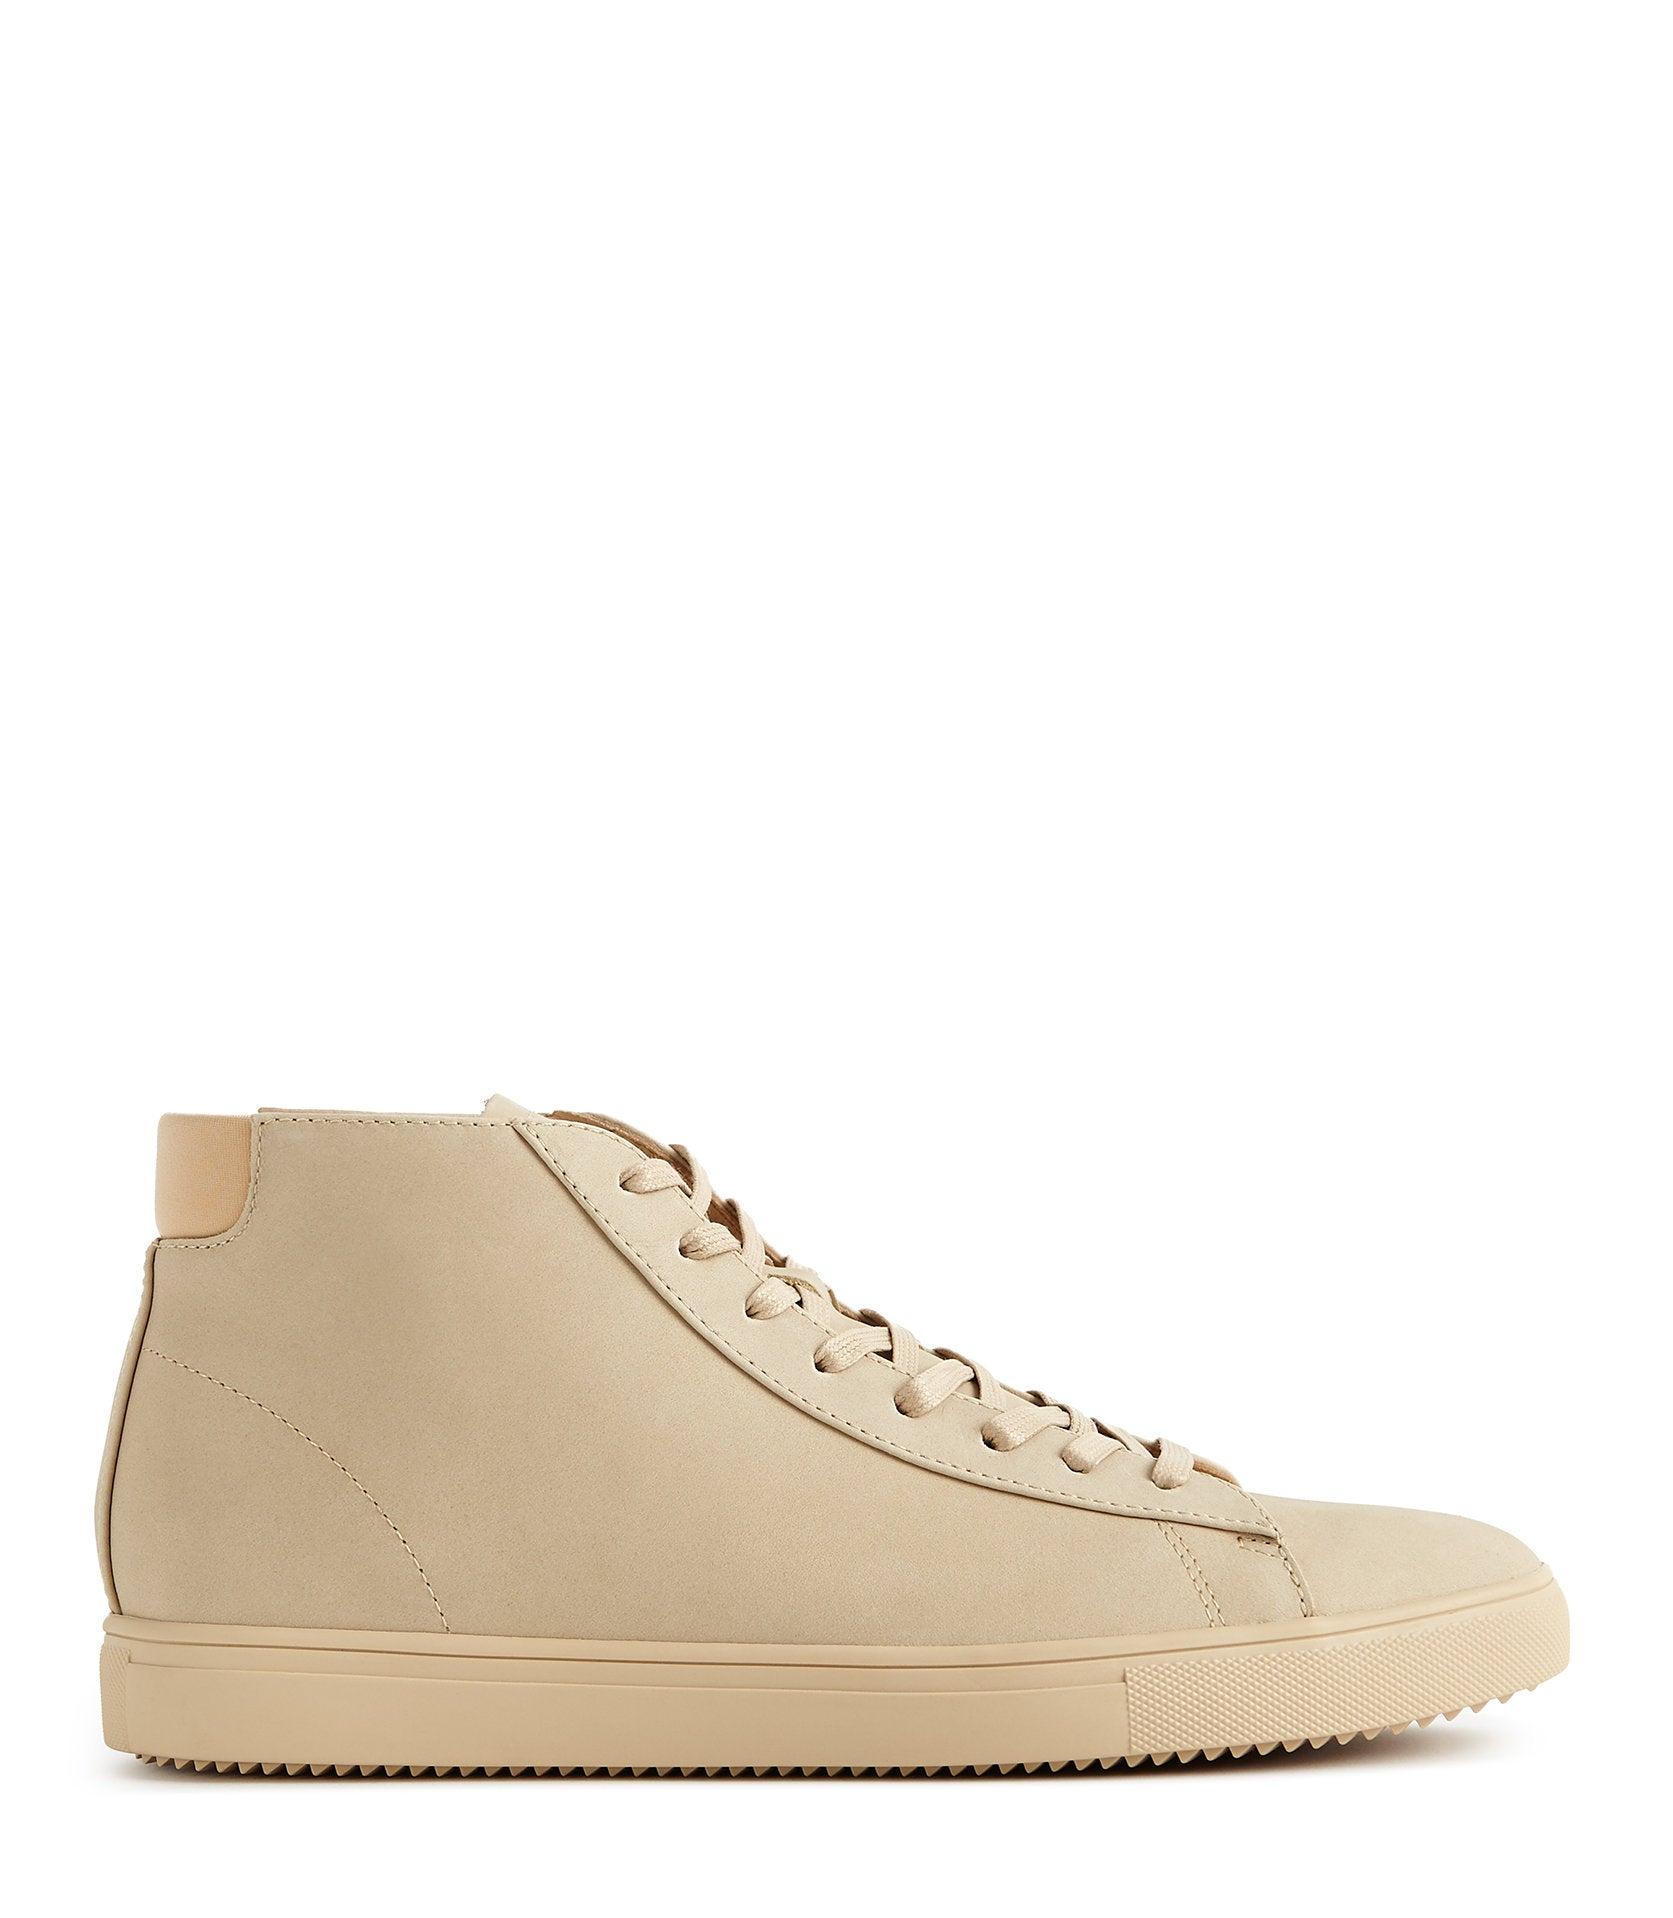 Reiss Clae Mid Top Leather Sneakers in Beige (Natural) for Men - Lyst